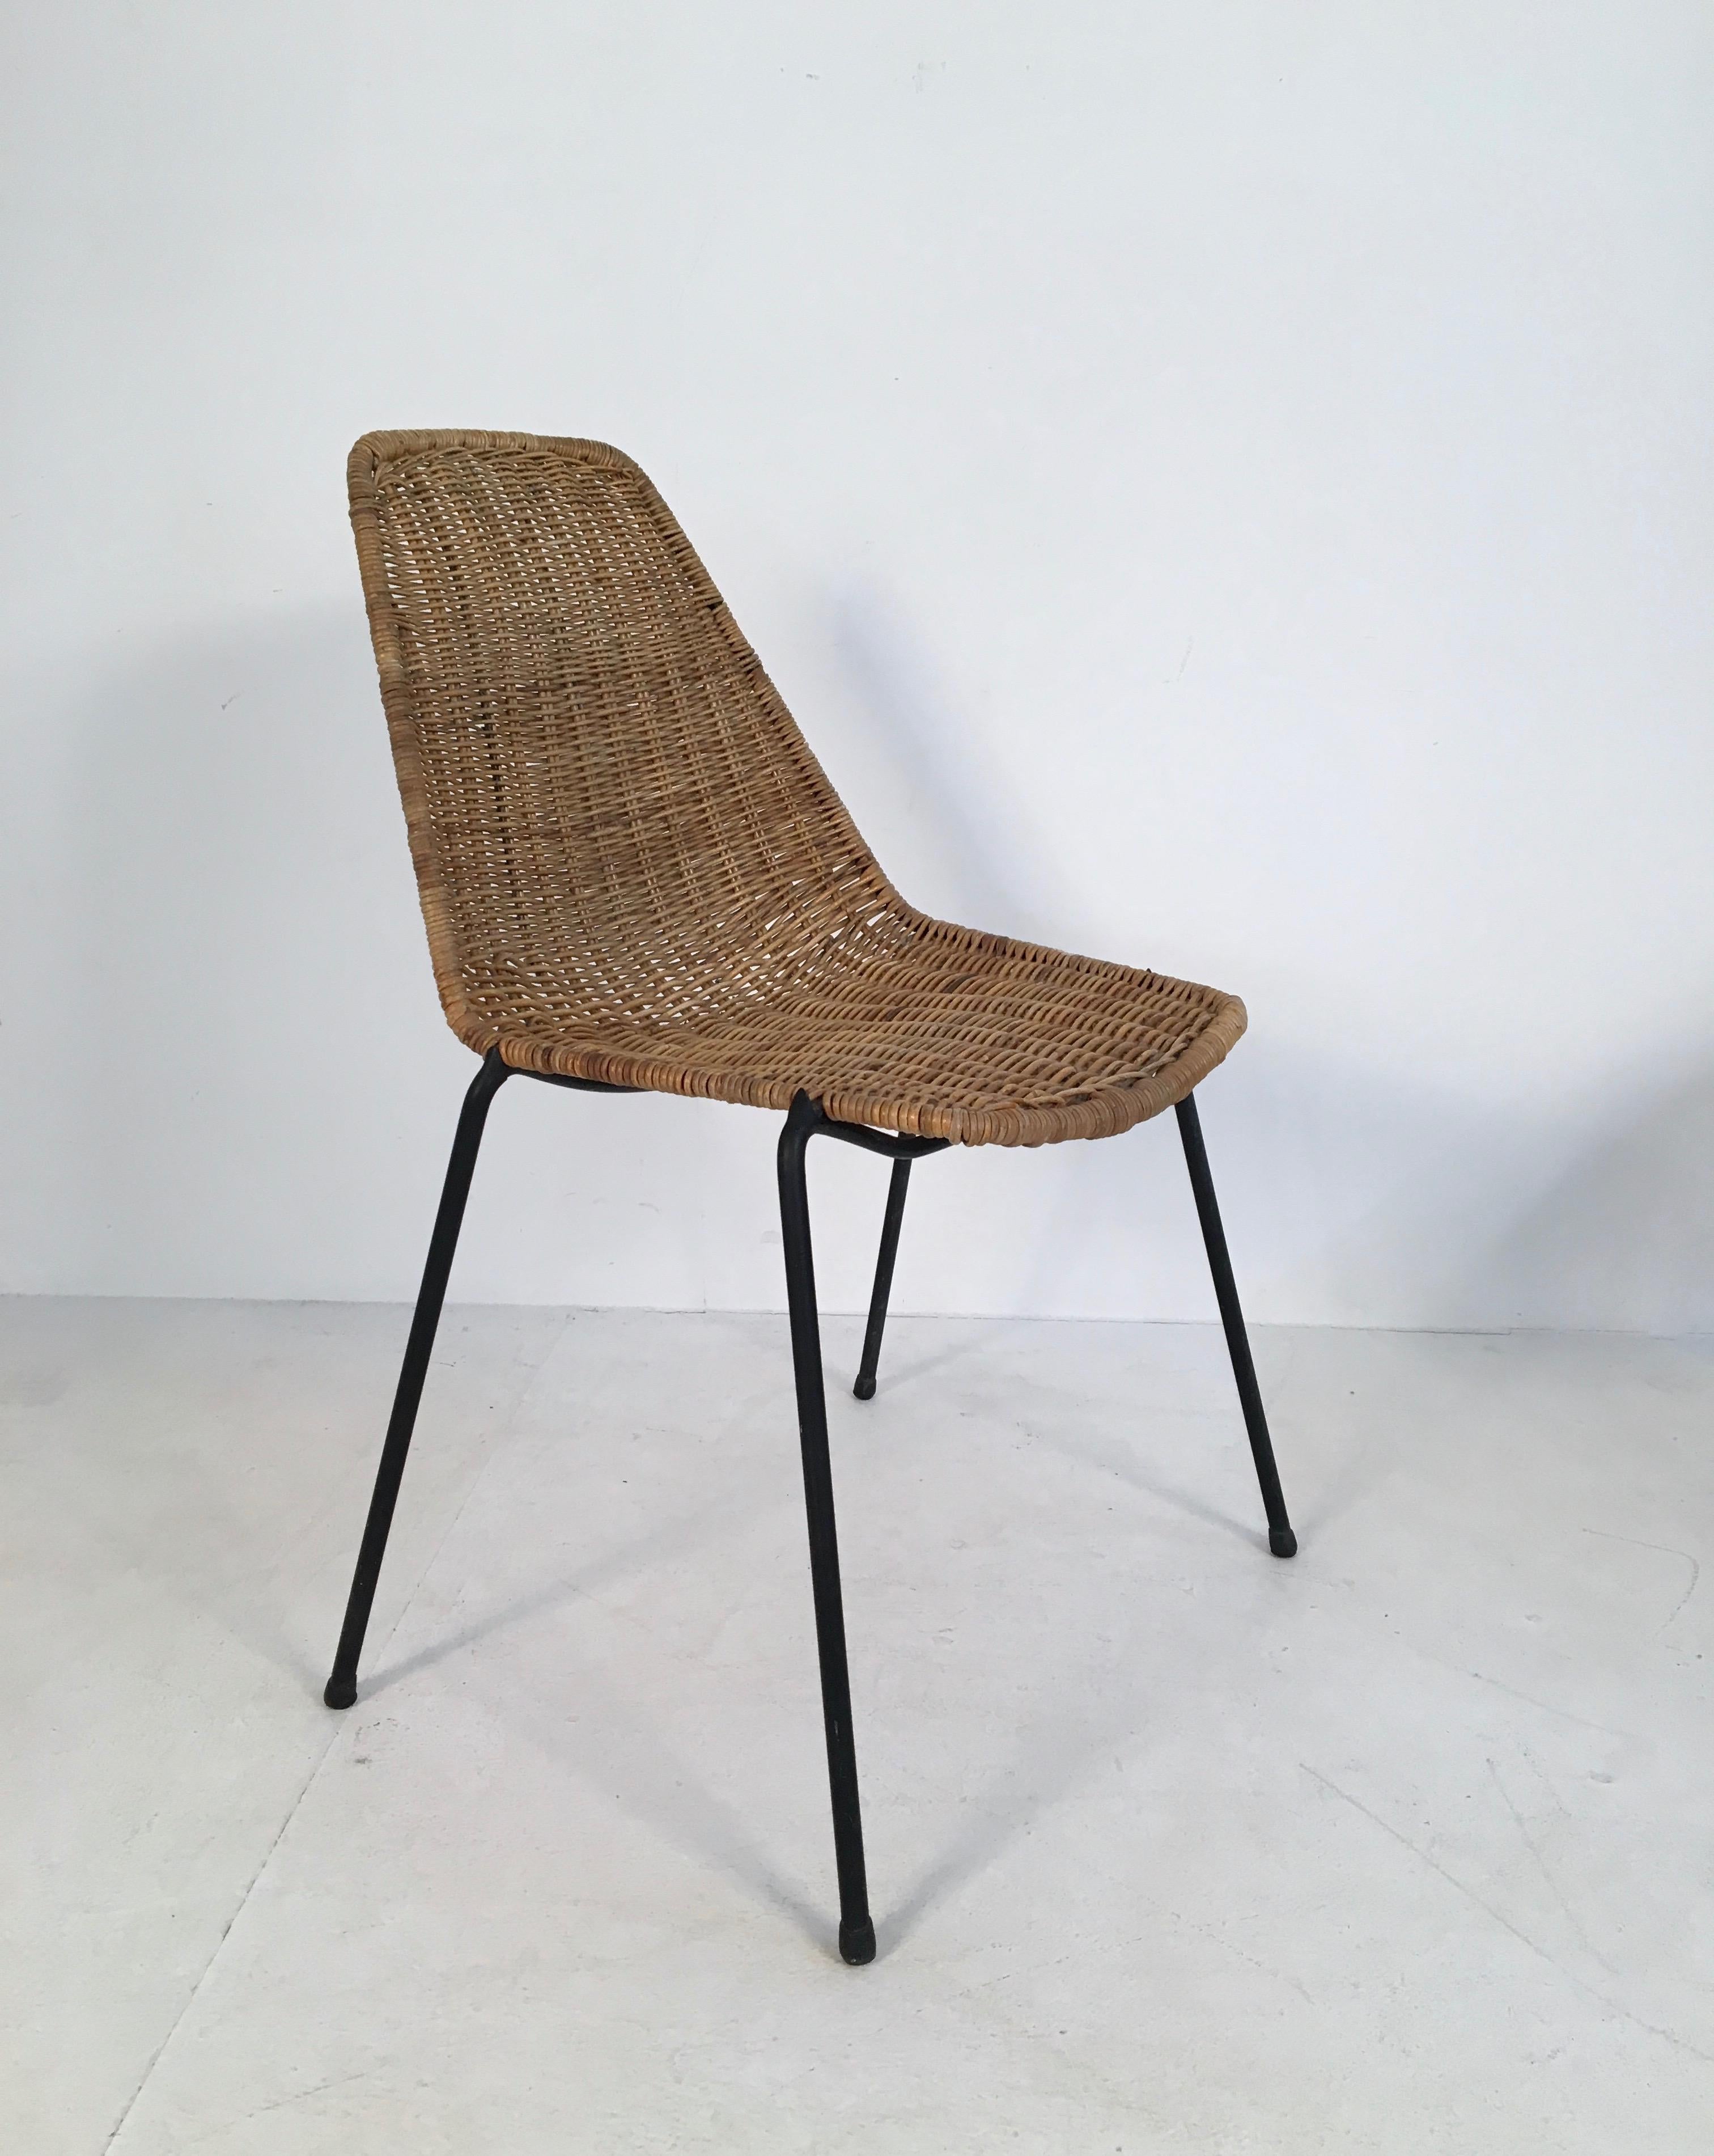 Italian 2 Midcentury Wicker Chairs by Campo & Graffi for Home Torino, Italy, circa 1950 For Sale